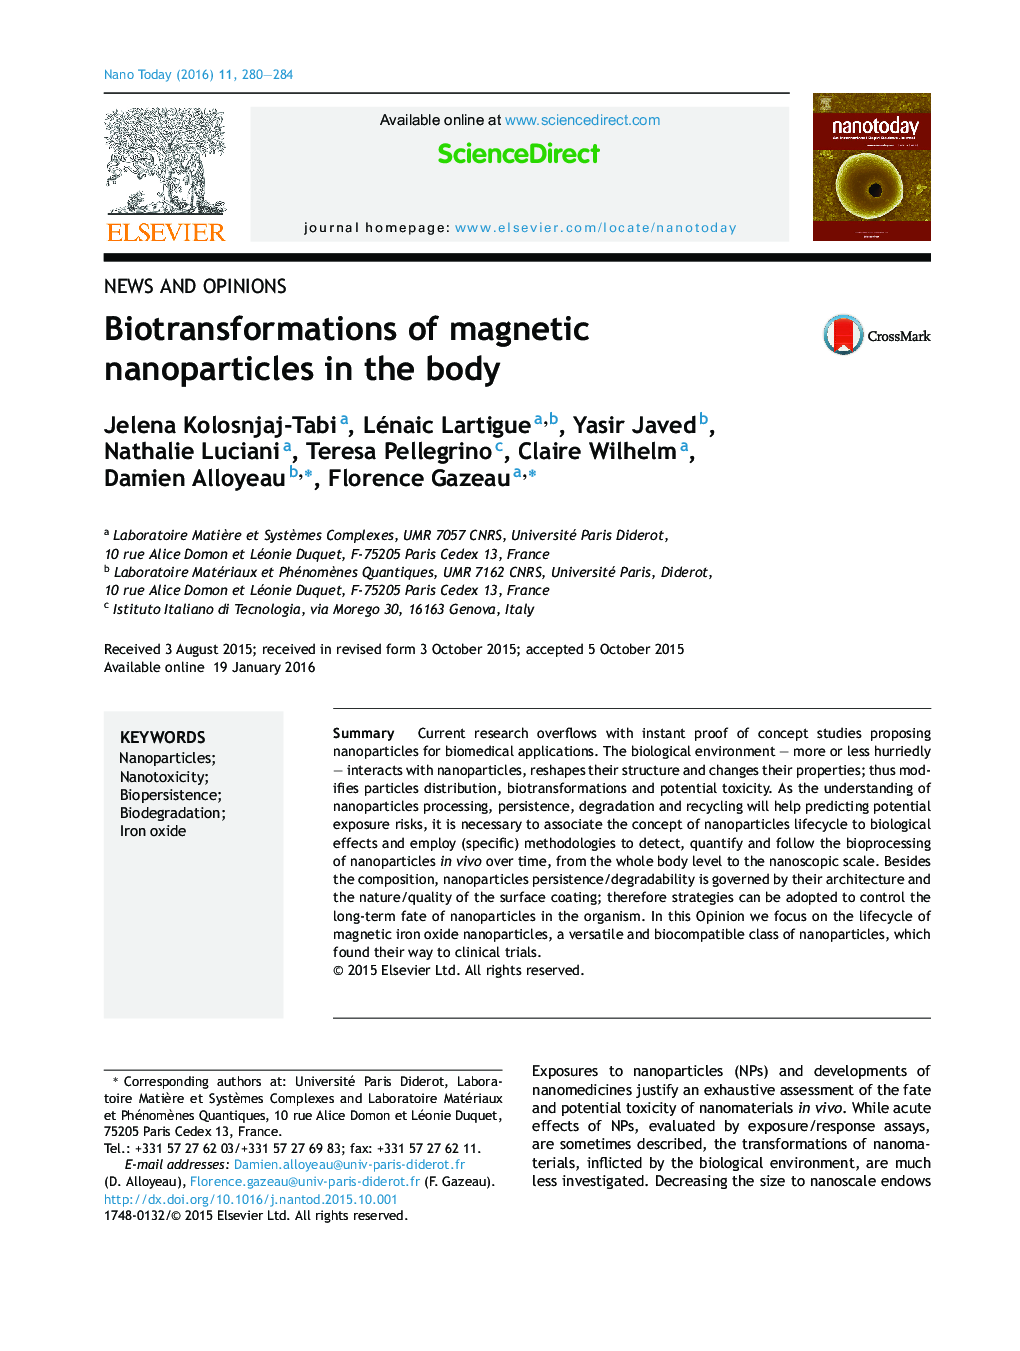 Biotransformations of magnetic nanoparticles in the body